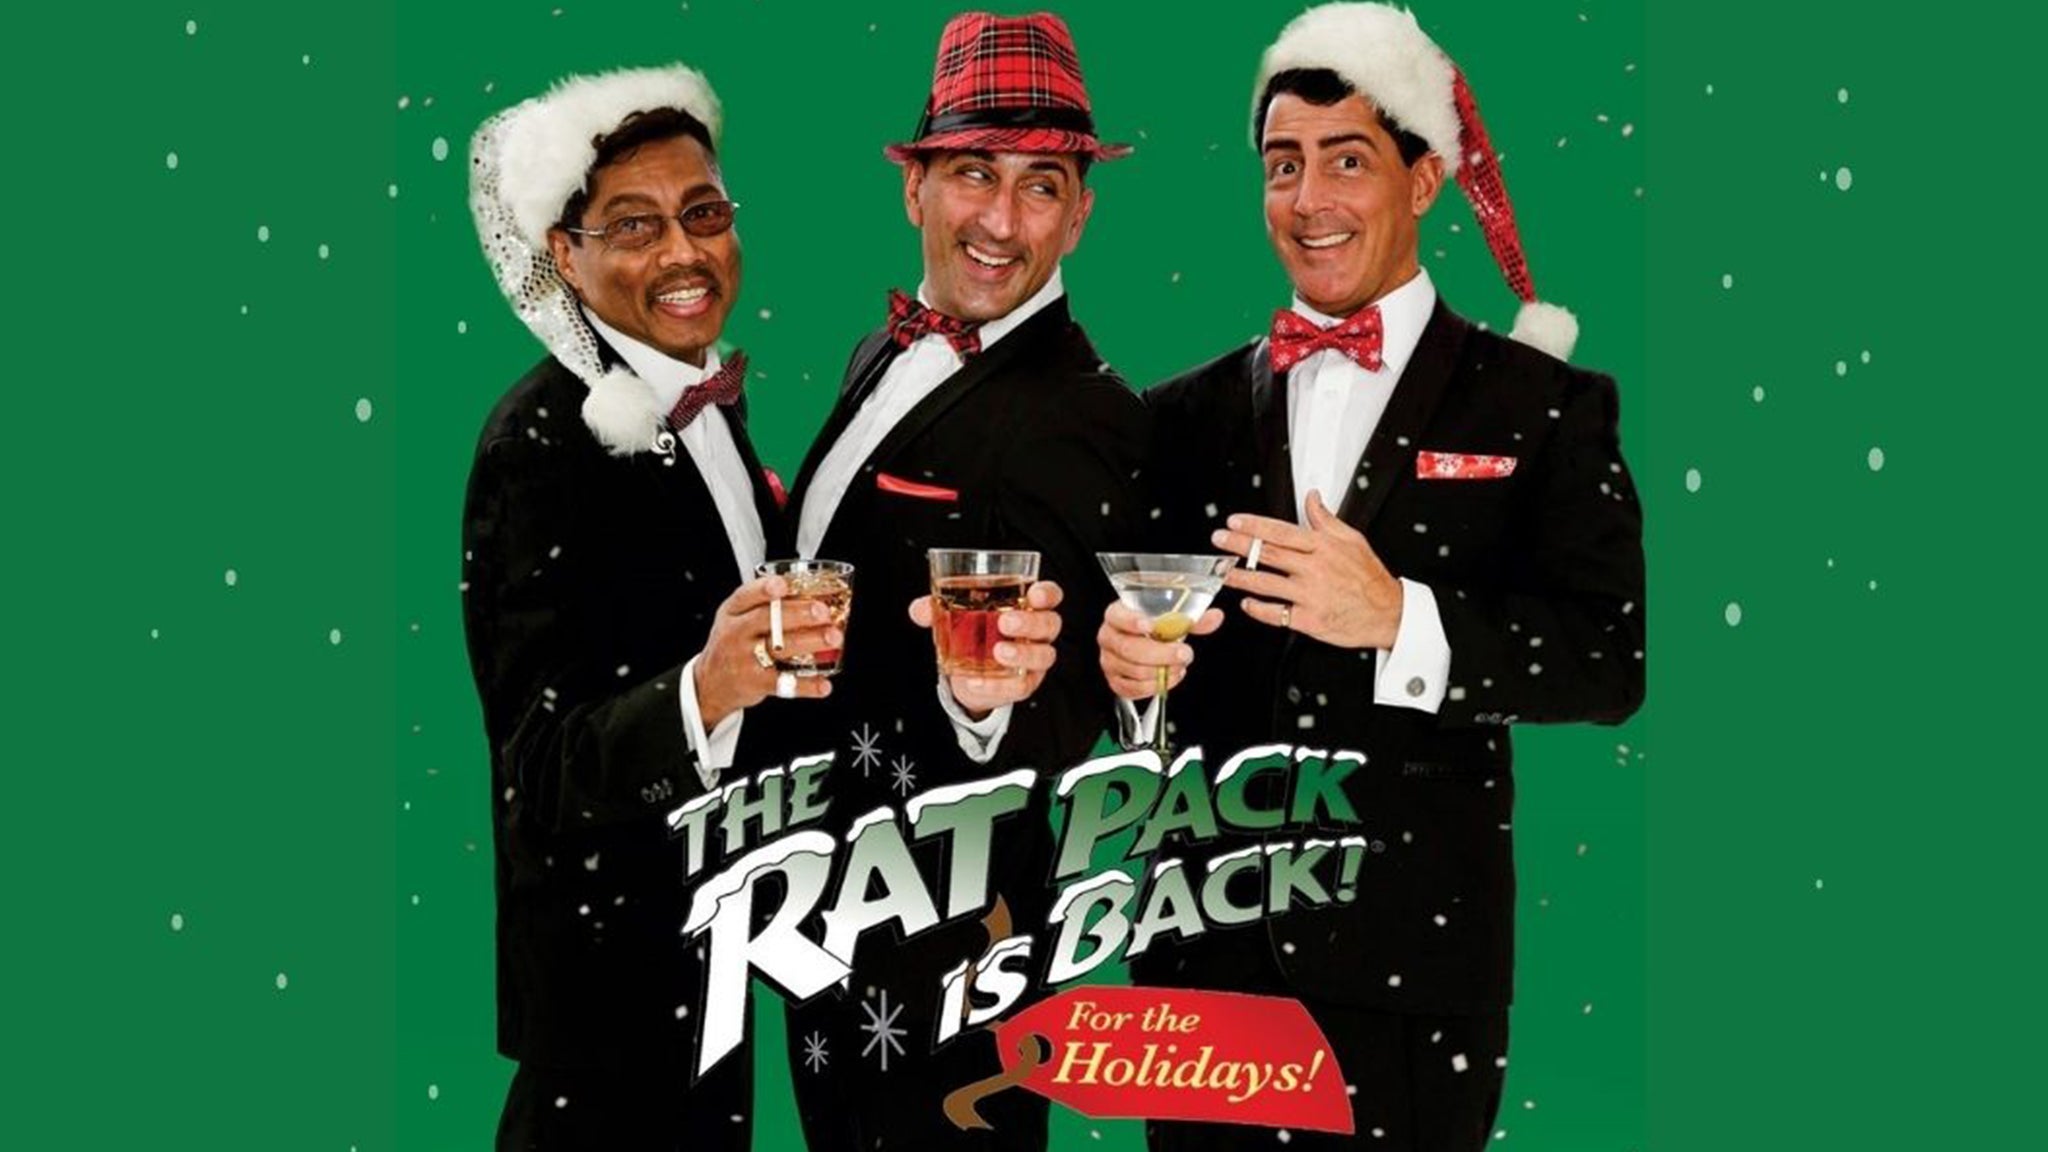 The Rat Pack is Back for The Holidays! in Elkhart promo photo for VIP Package presale offer code